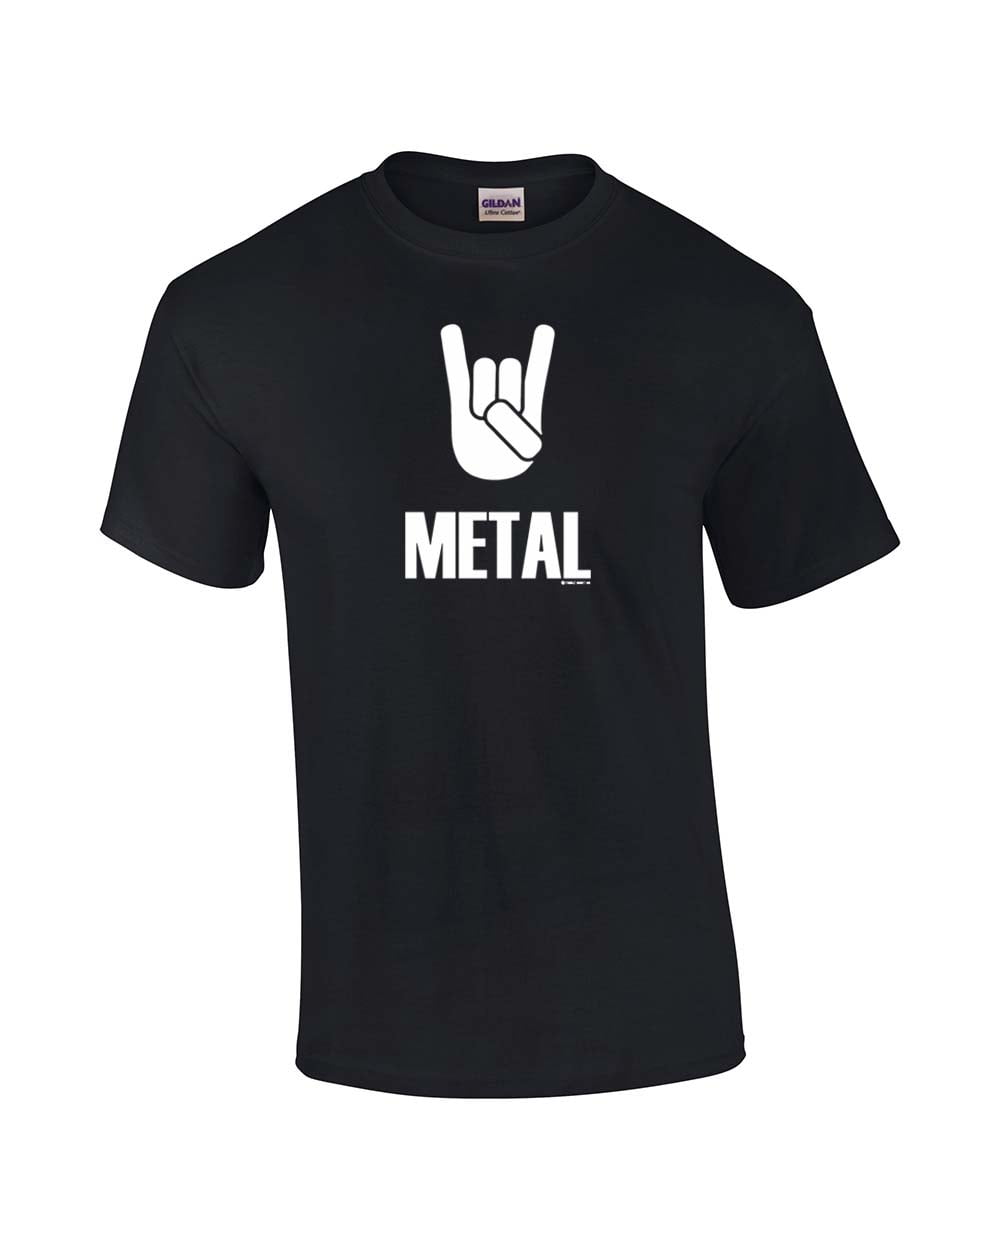 Metal Rapper  Band Medium to 6 X Large Pick Your Size T-Shirt 